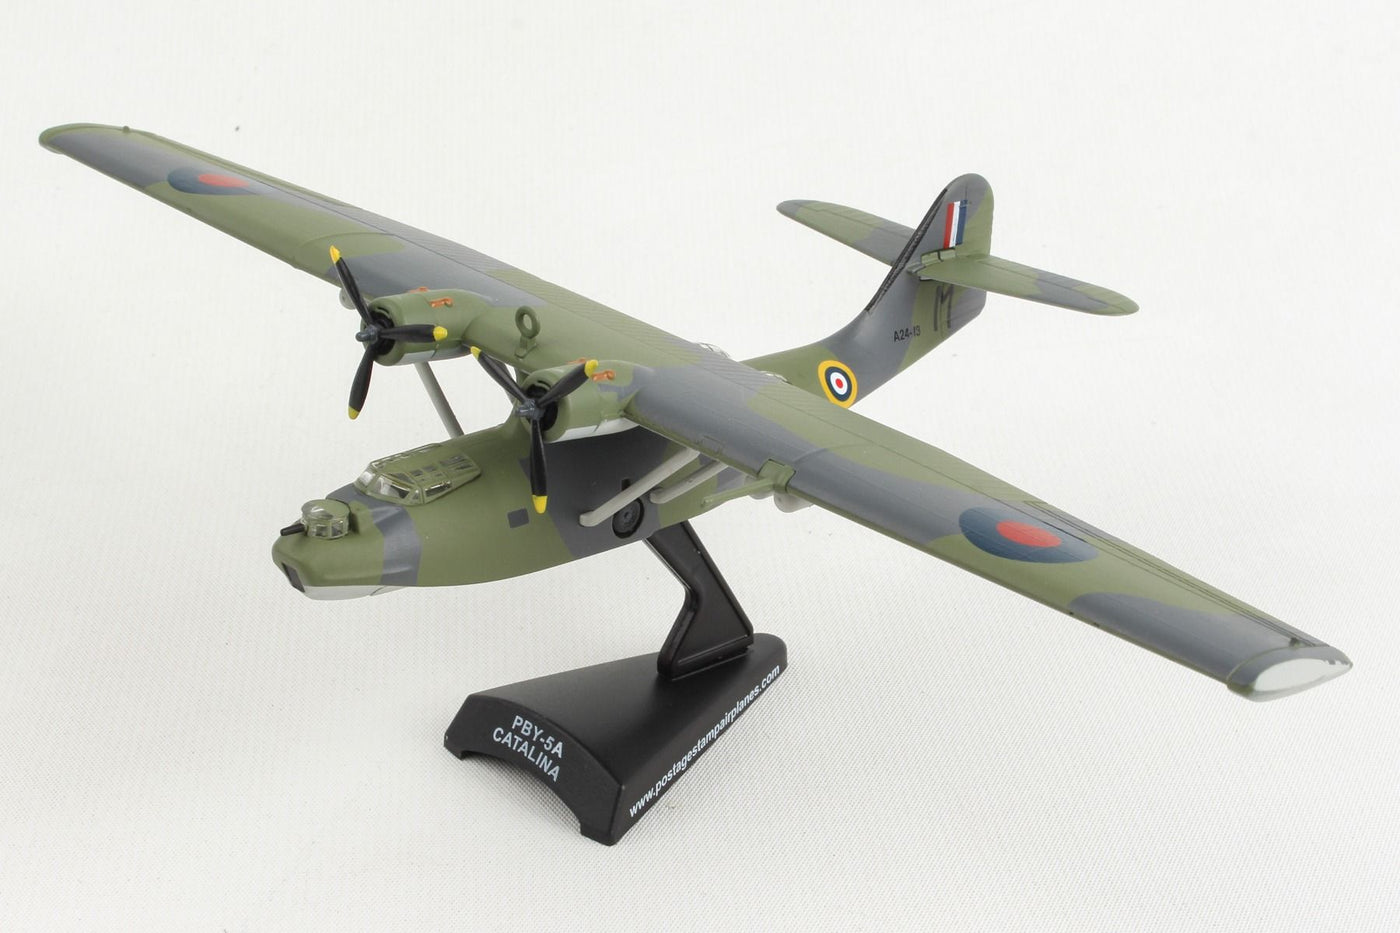 1/150 PBY5A Catalina RAAF A2413   M for Mother